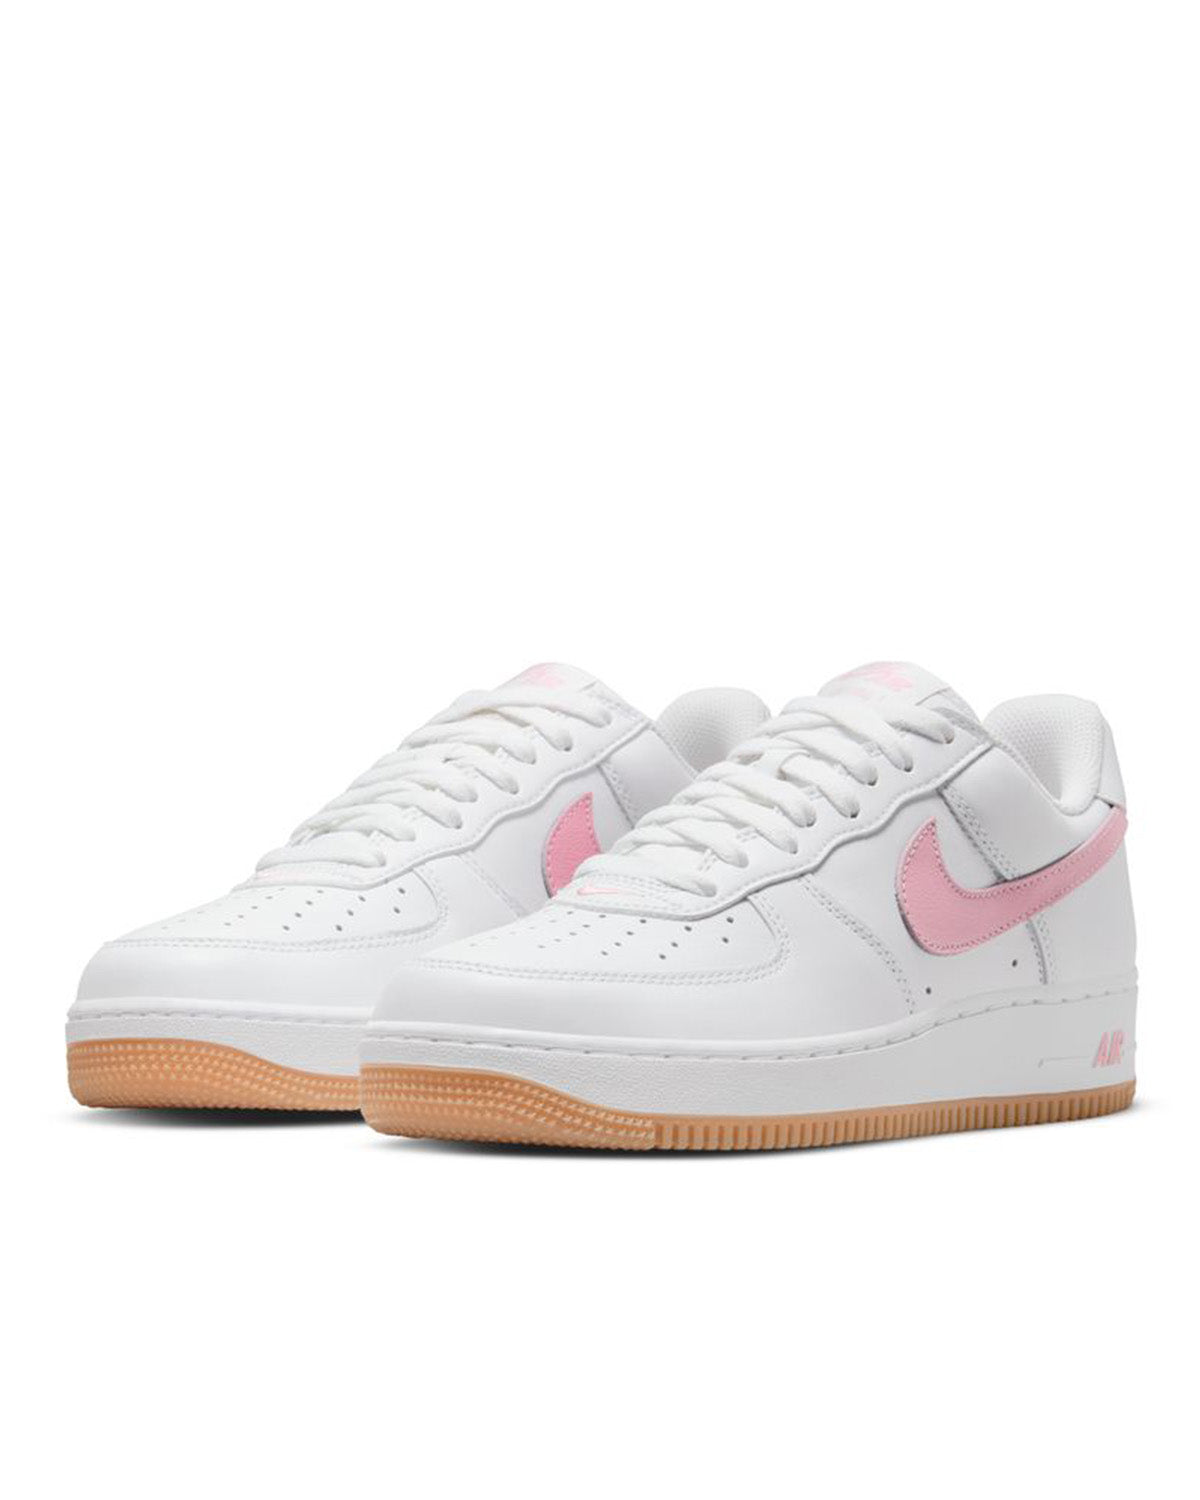 Air Force 1 Low Retro White/Pink/Gum Yellow